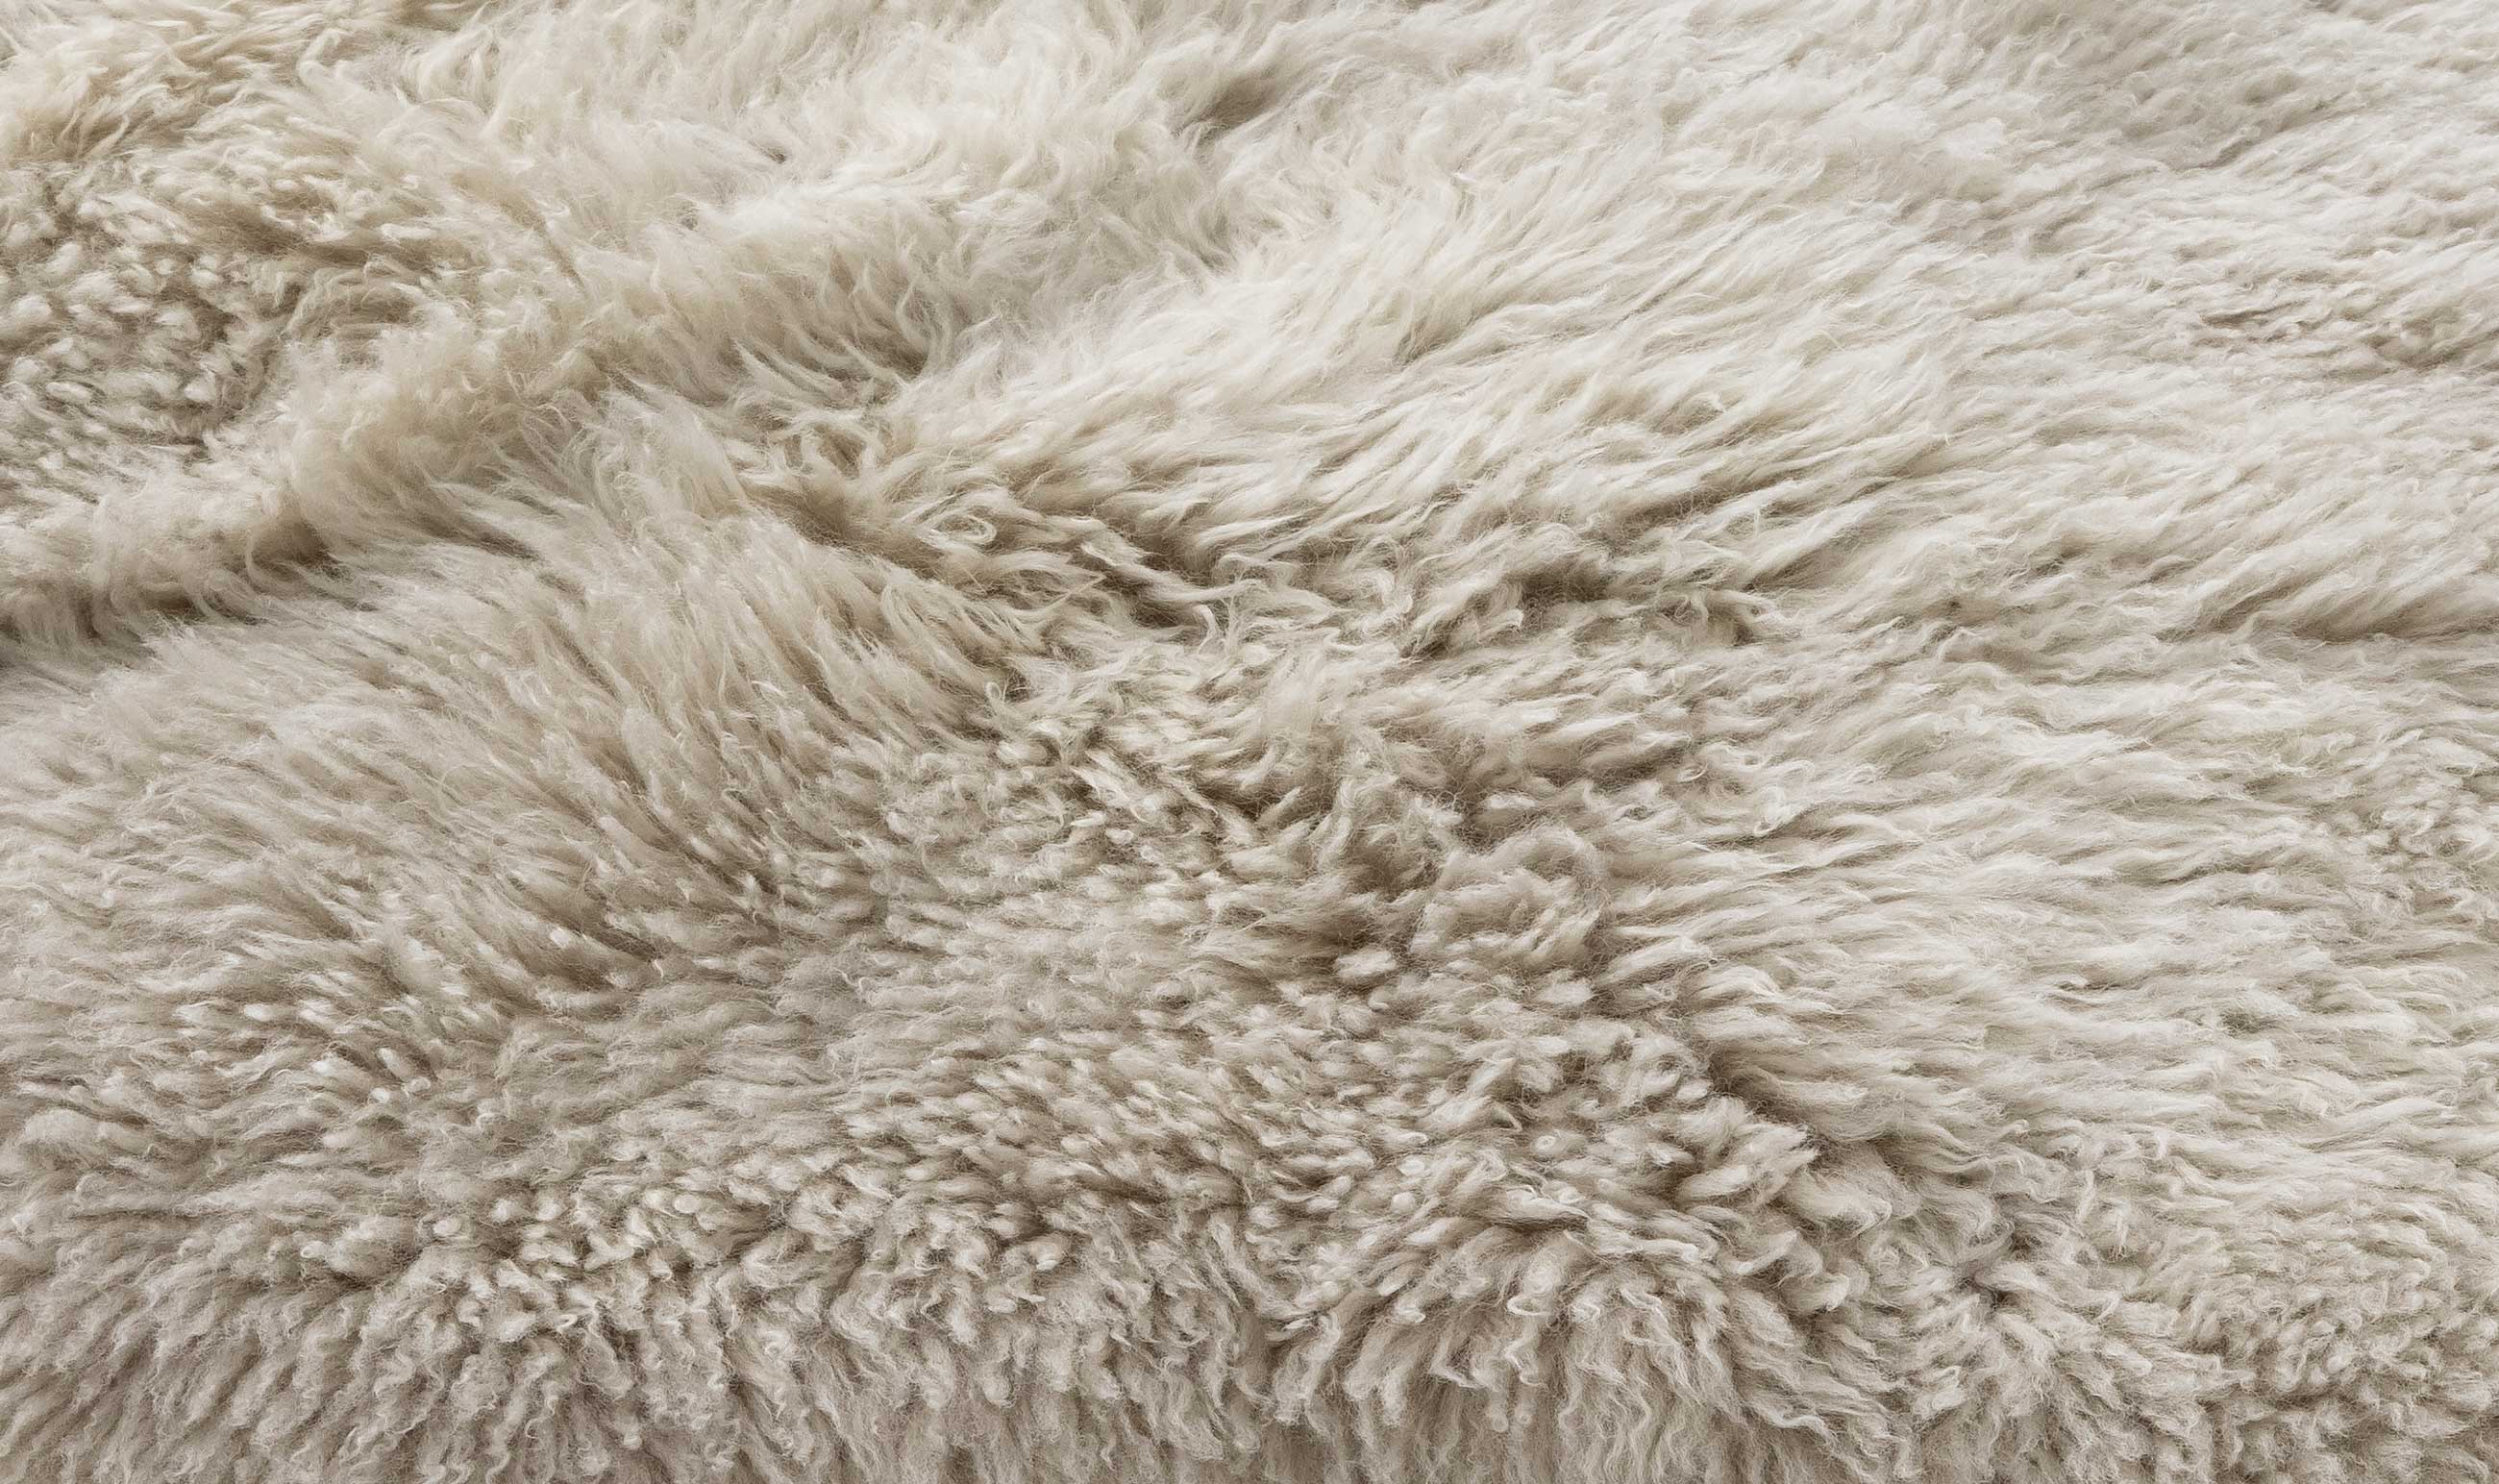 What to Know About Rug Textures Before Buying – Wilson & Dorset